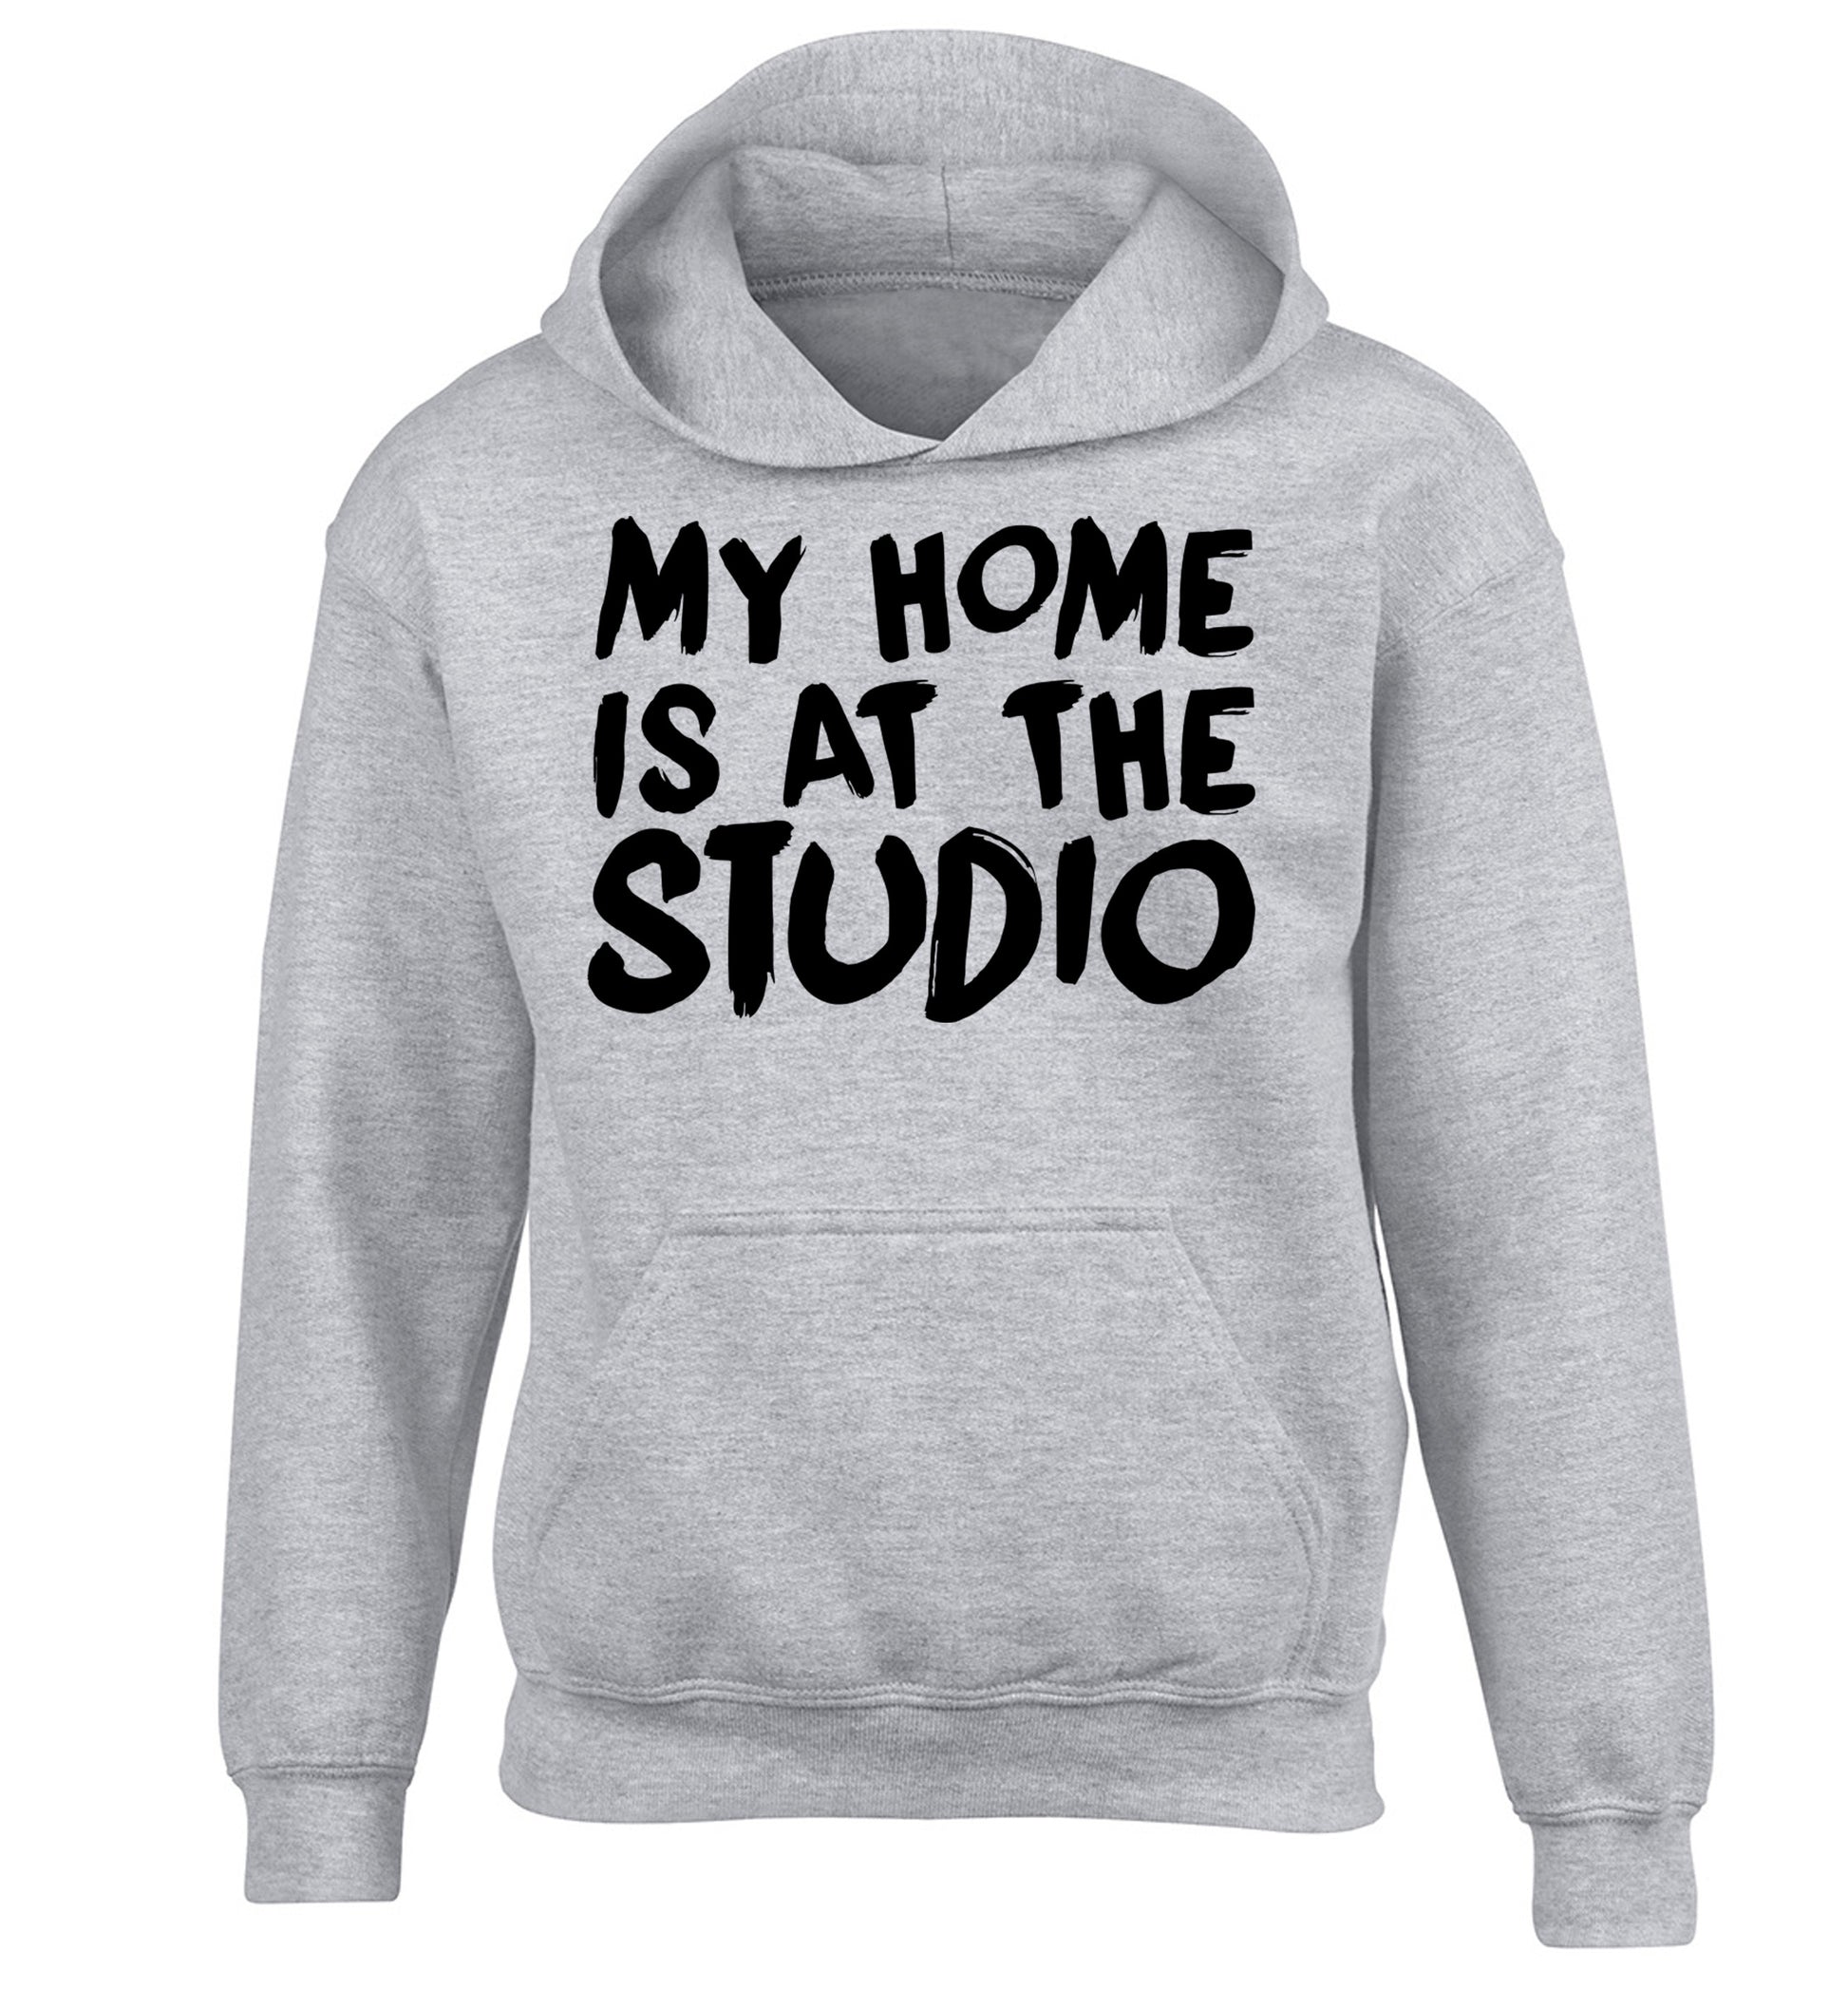 My home is at the studio children's grey hoodie 12-14 Years